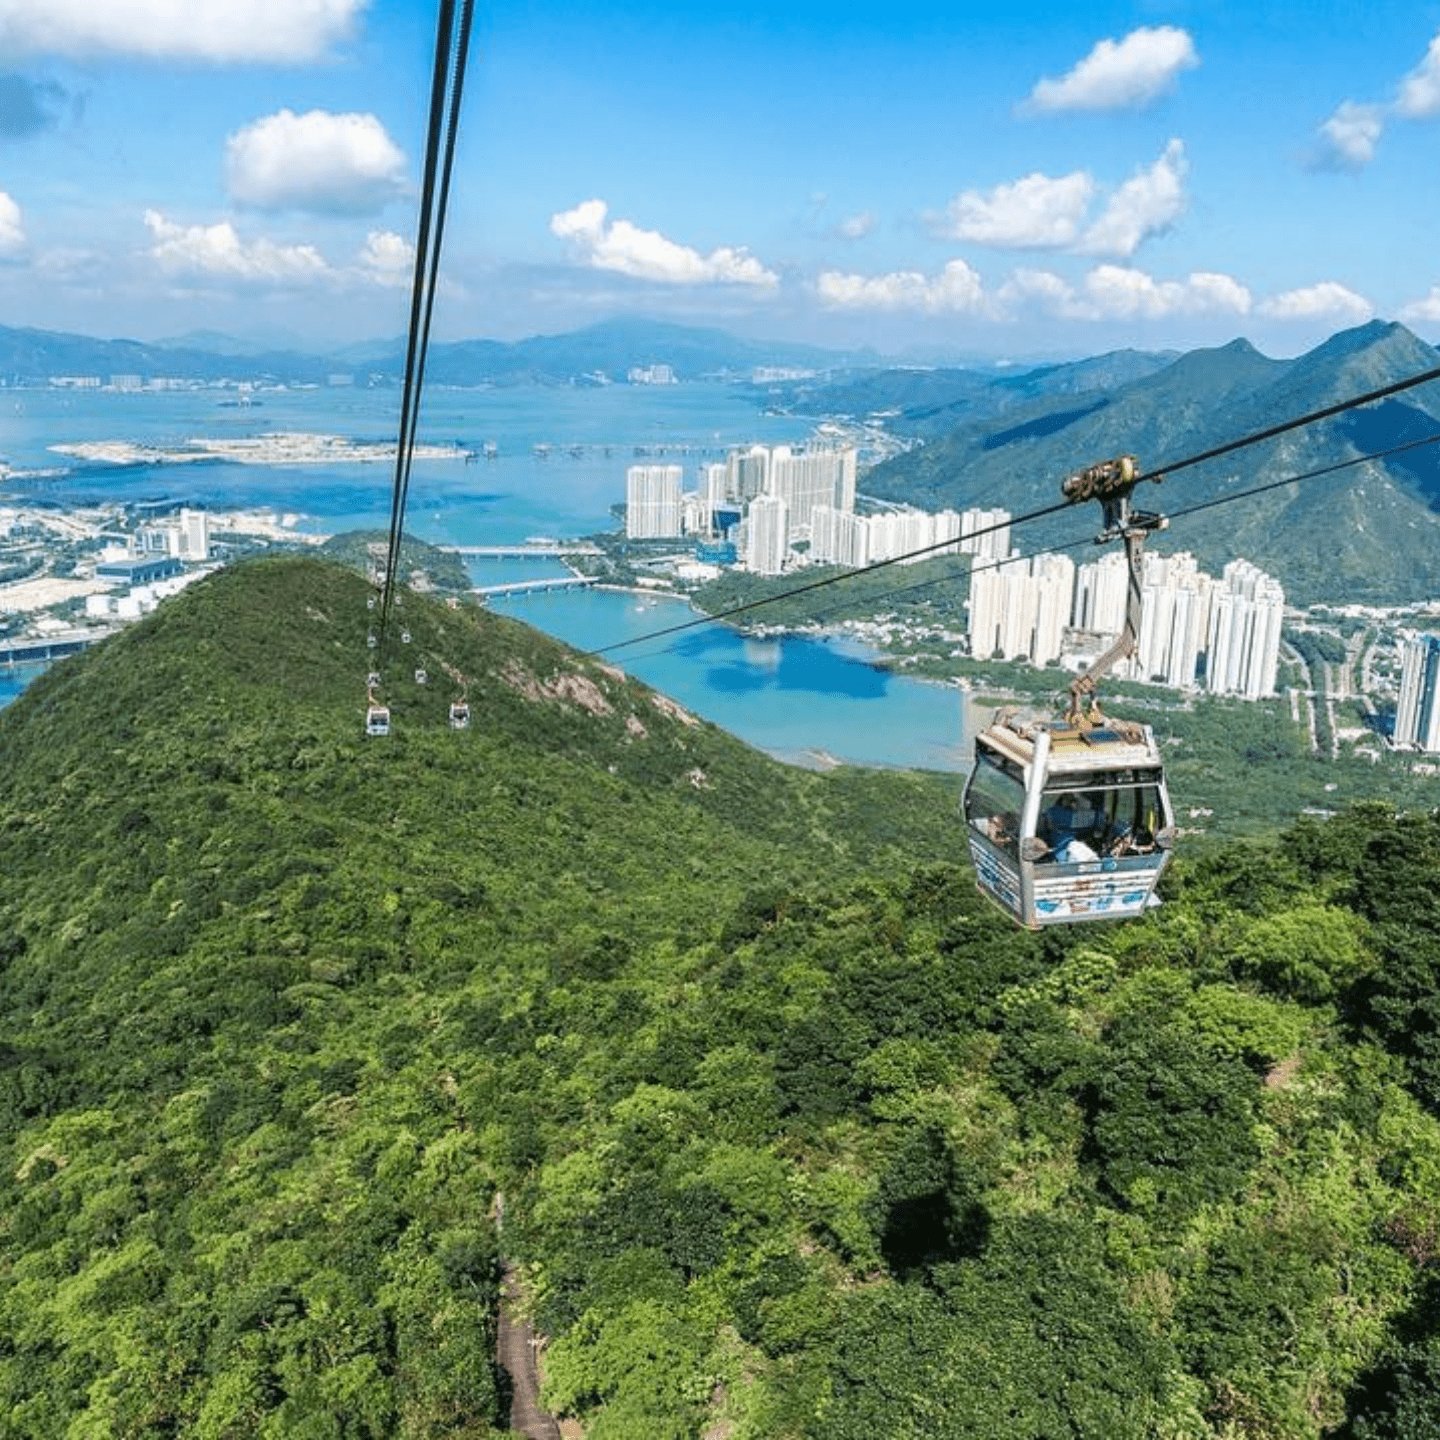 Your Neighbourhood Guide To Tung Chung: What To See, Eat & Shop